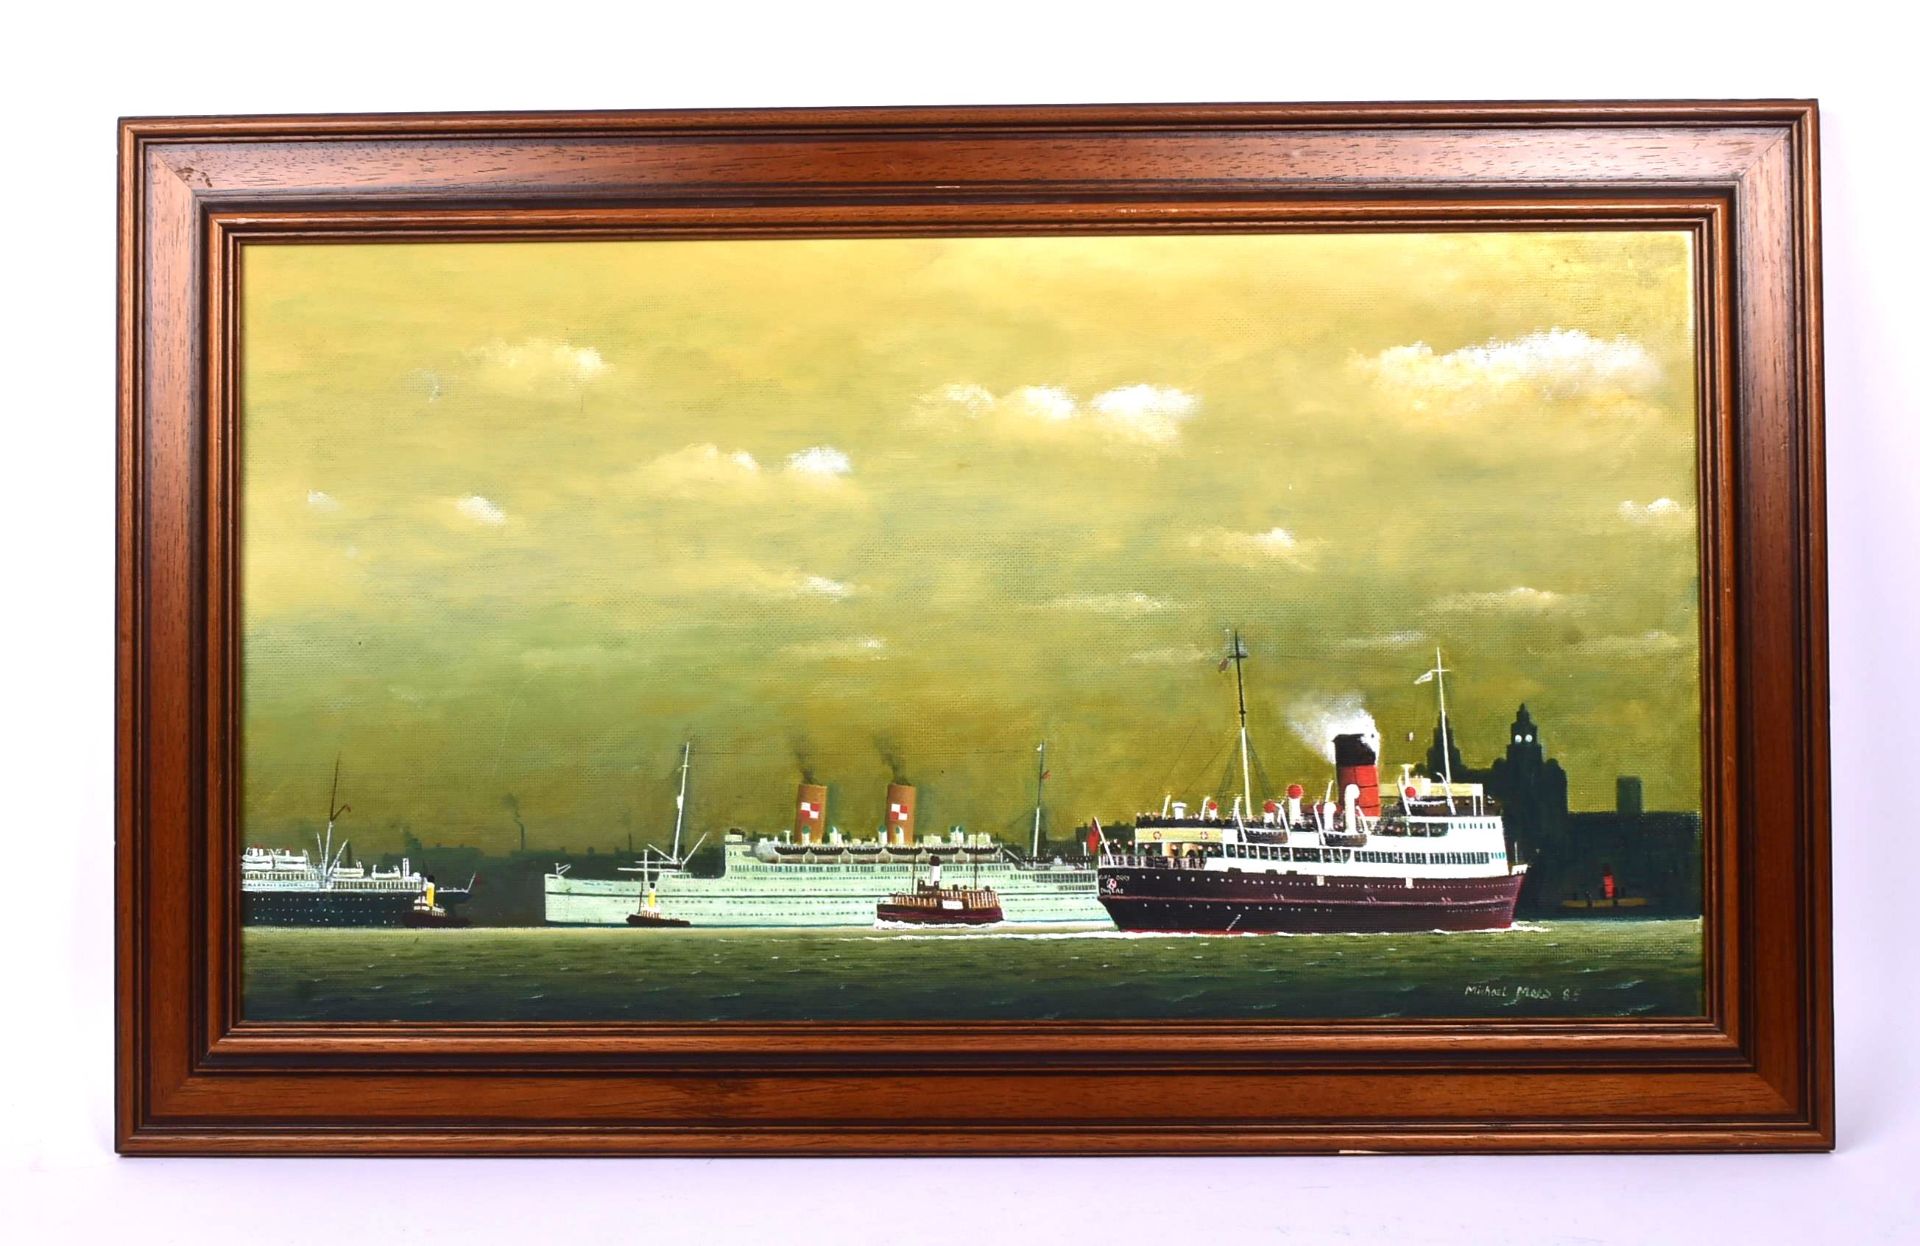 MICHAEL MAES - PAINTING OF MERSEY FERRY & DUCHESS OF RICHMOND